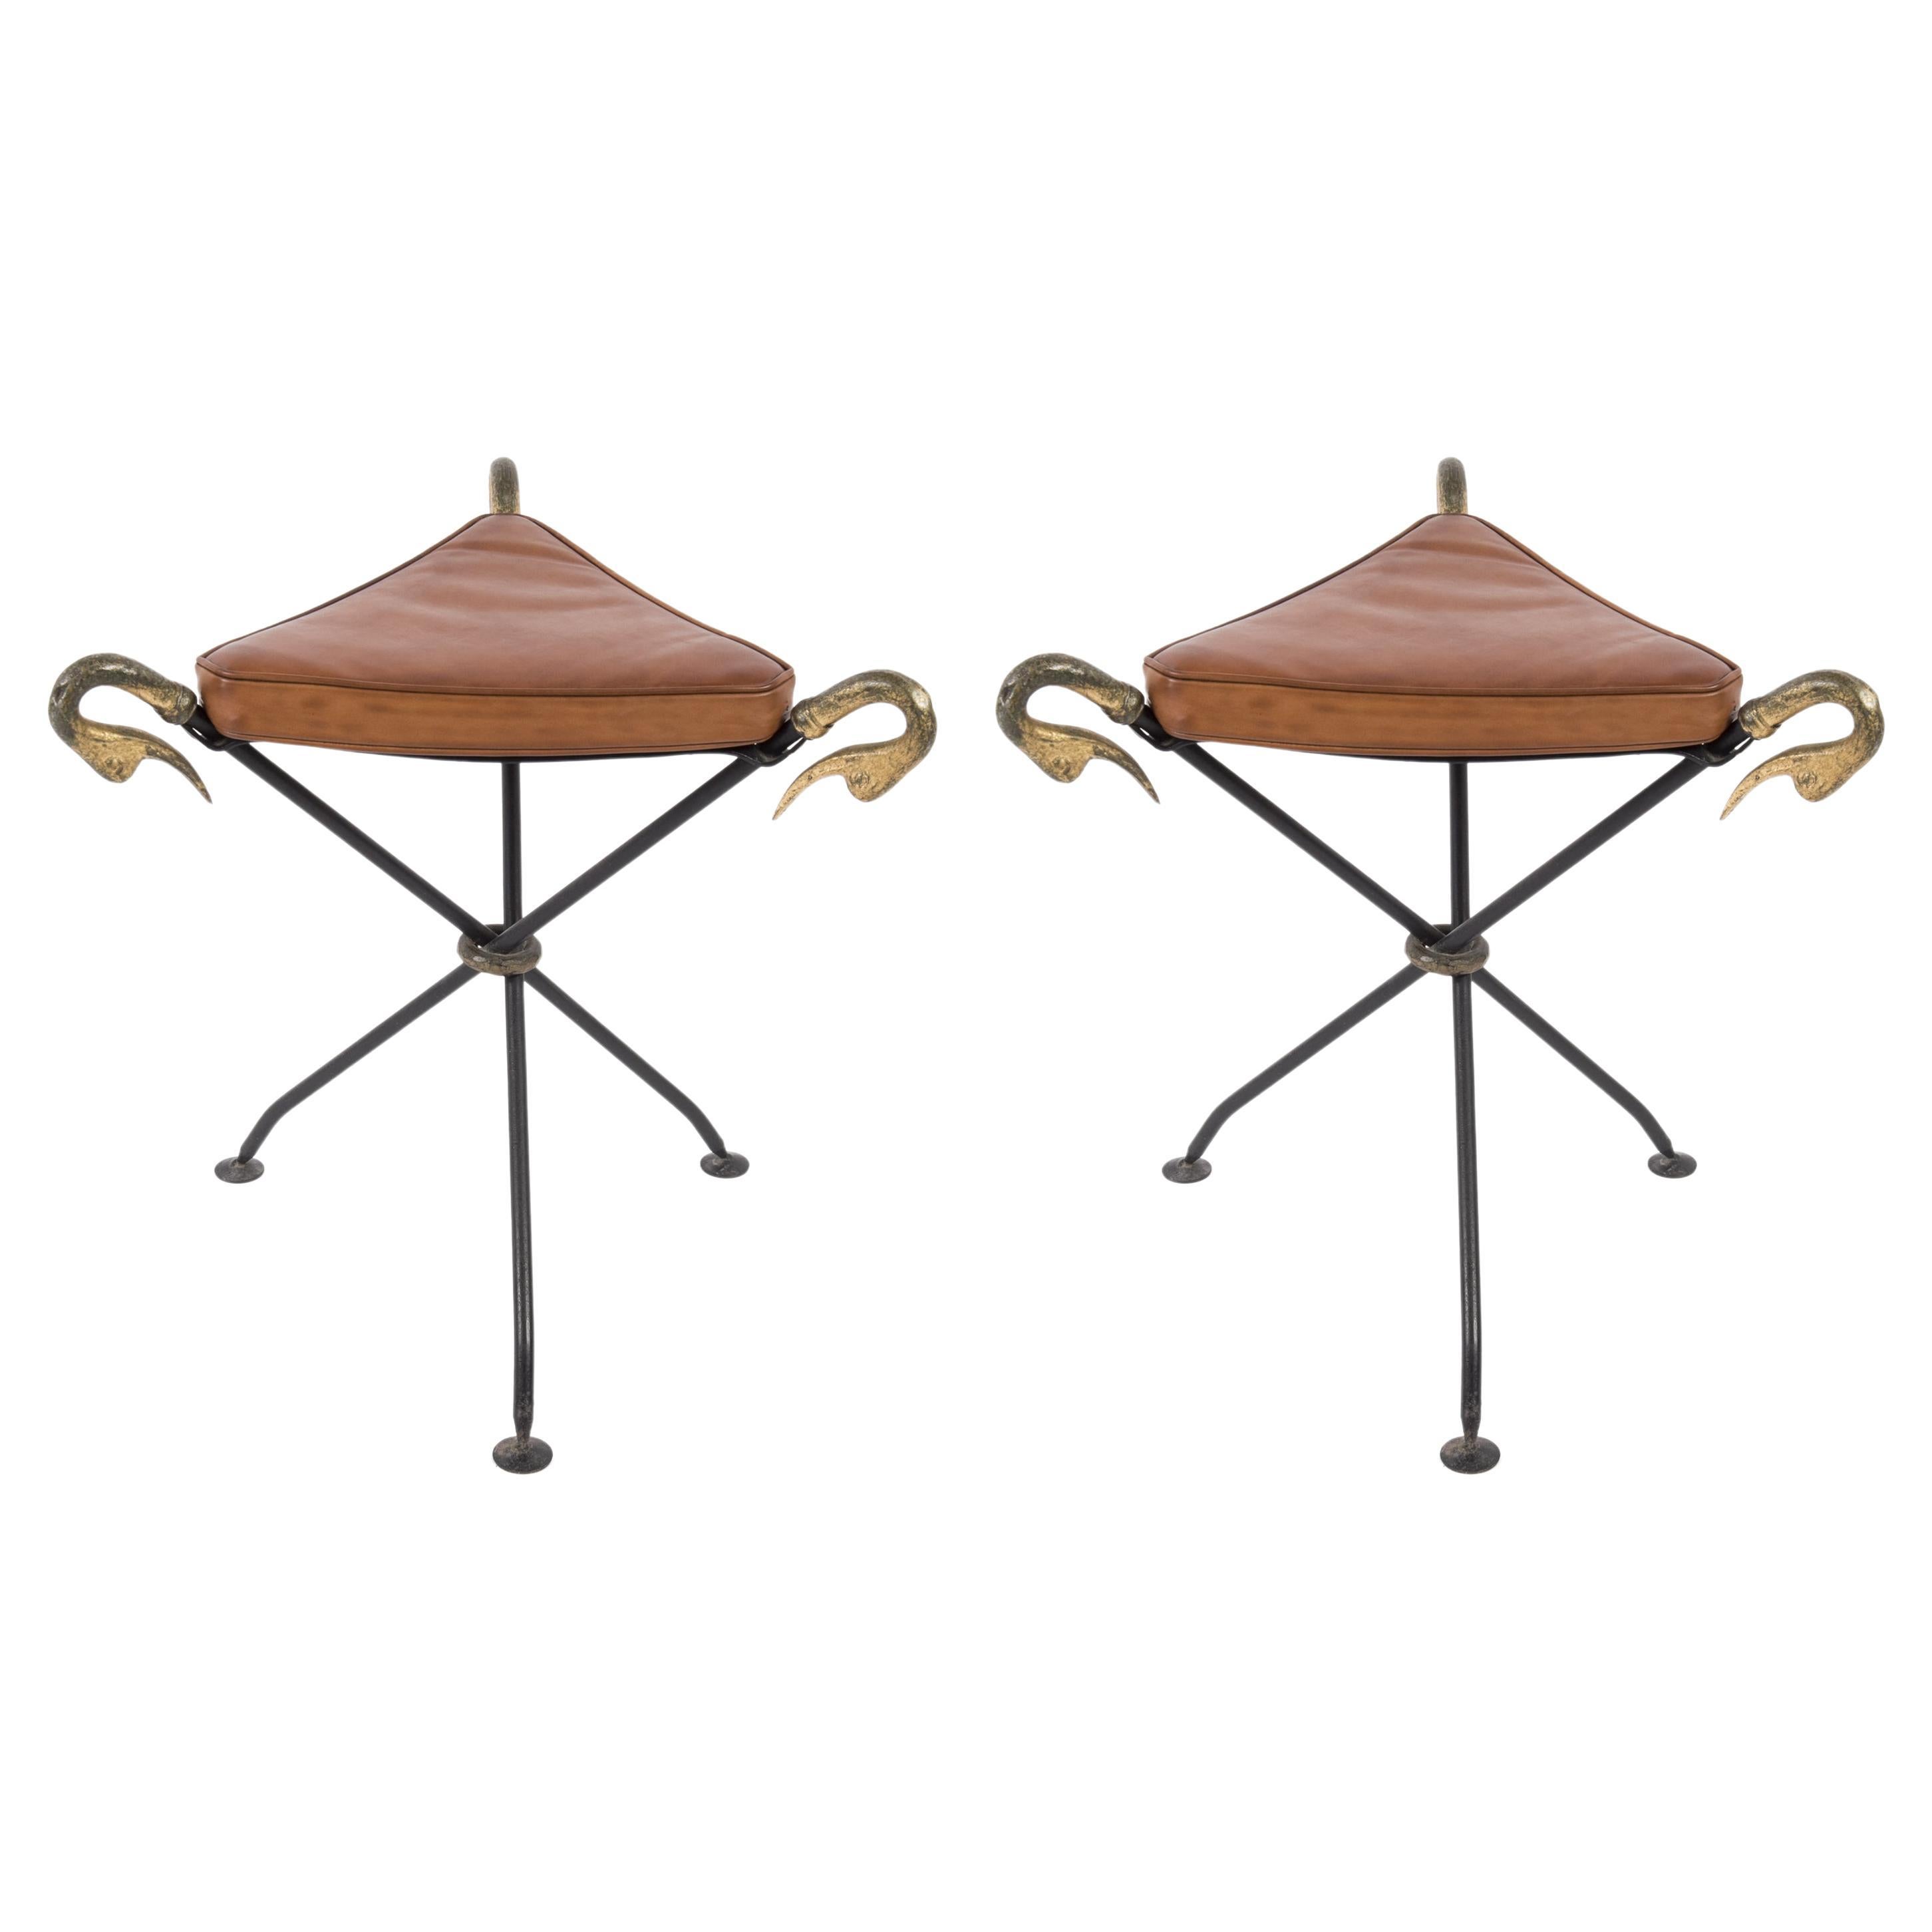 Pair of Neo-Classic Stools Attributed to Maison Jansen